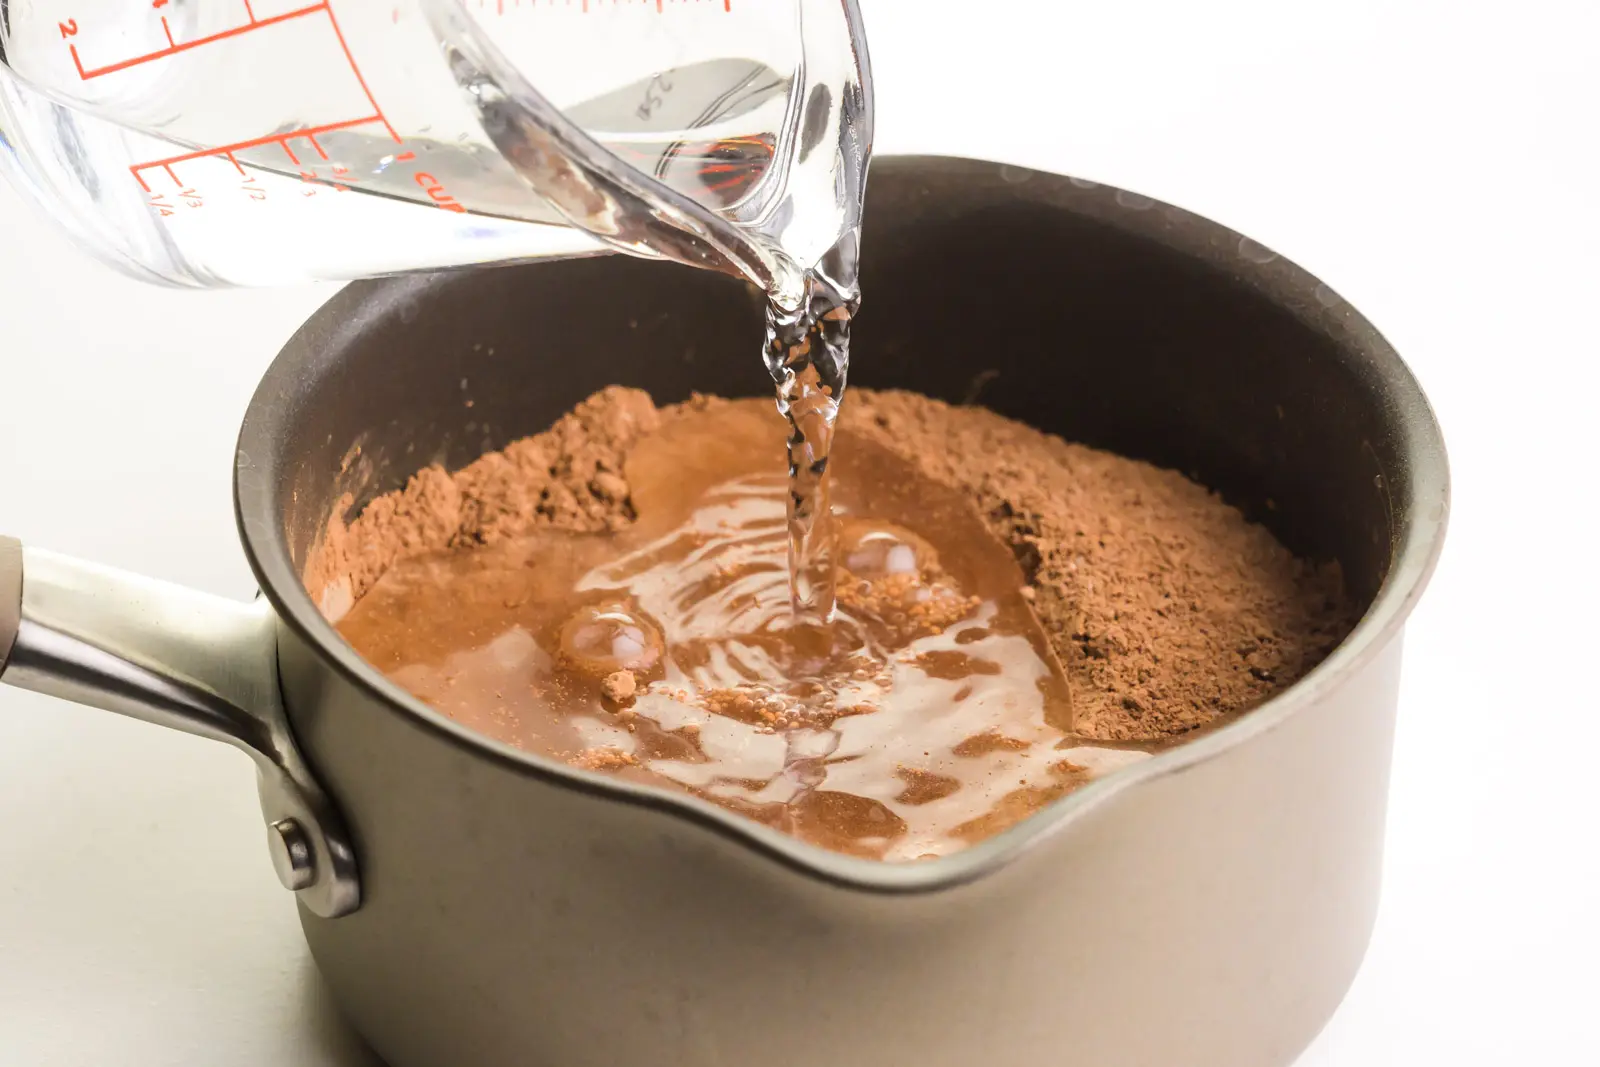 Water is being poured into a saucepan with cocoa powder.